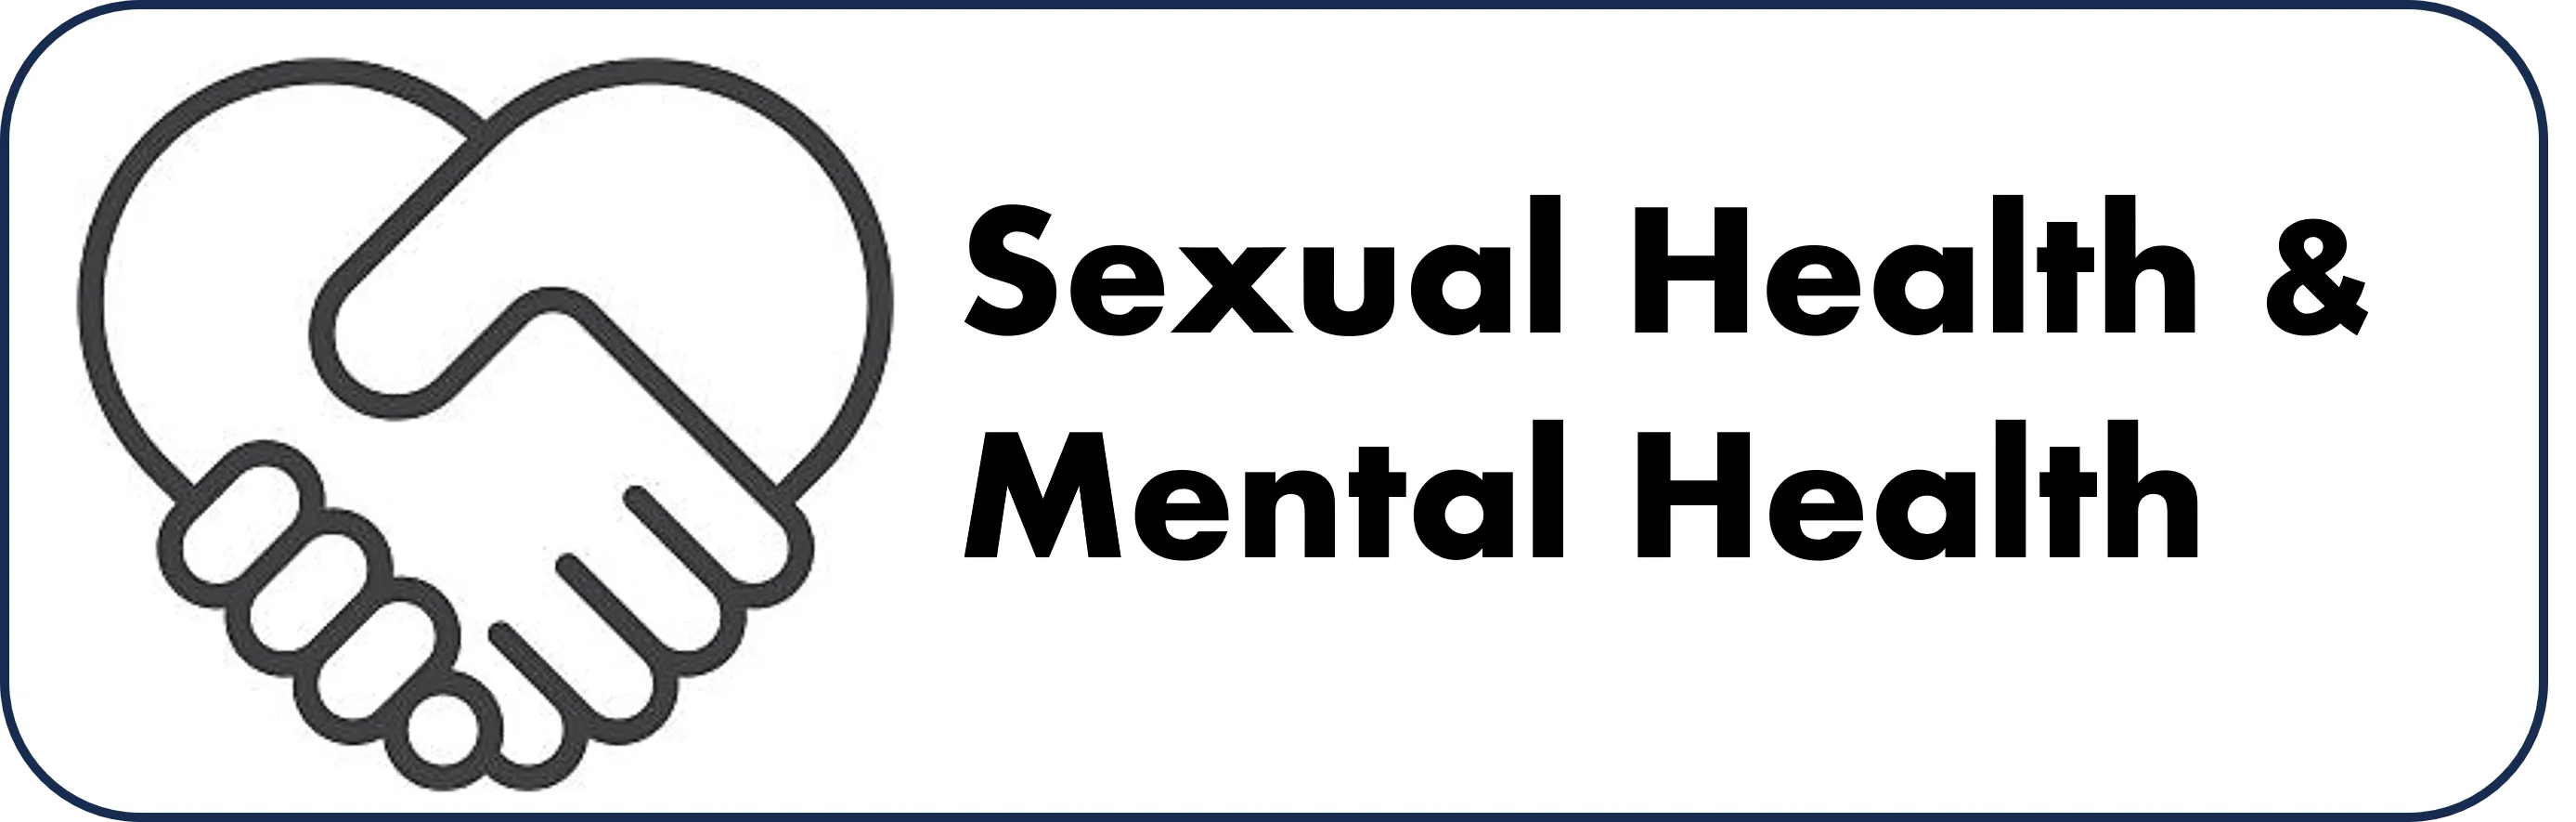 Sexual Health and Mental Health logo high res V2